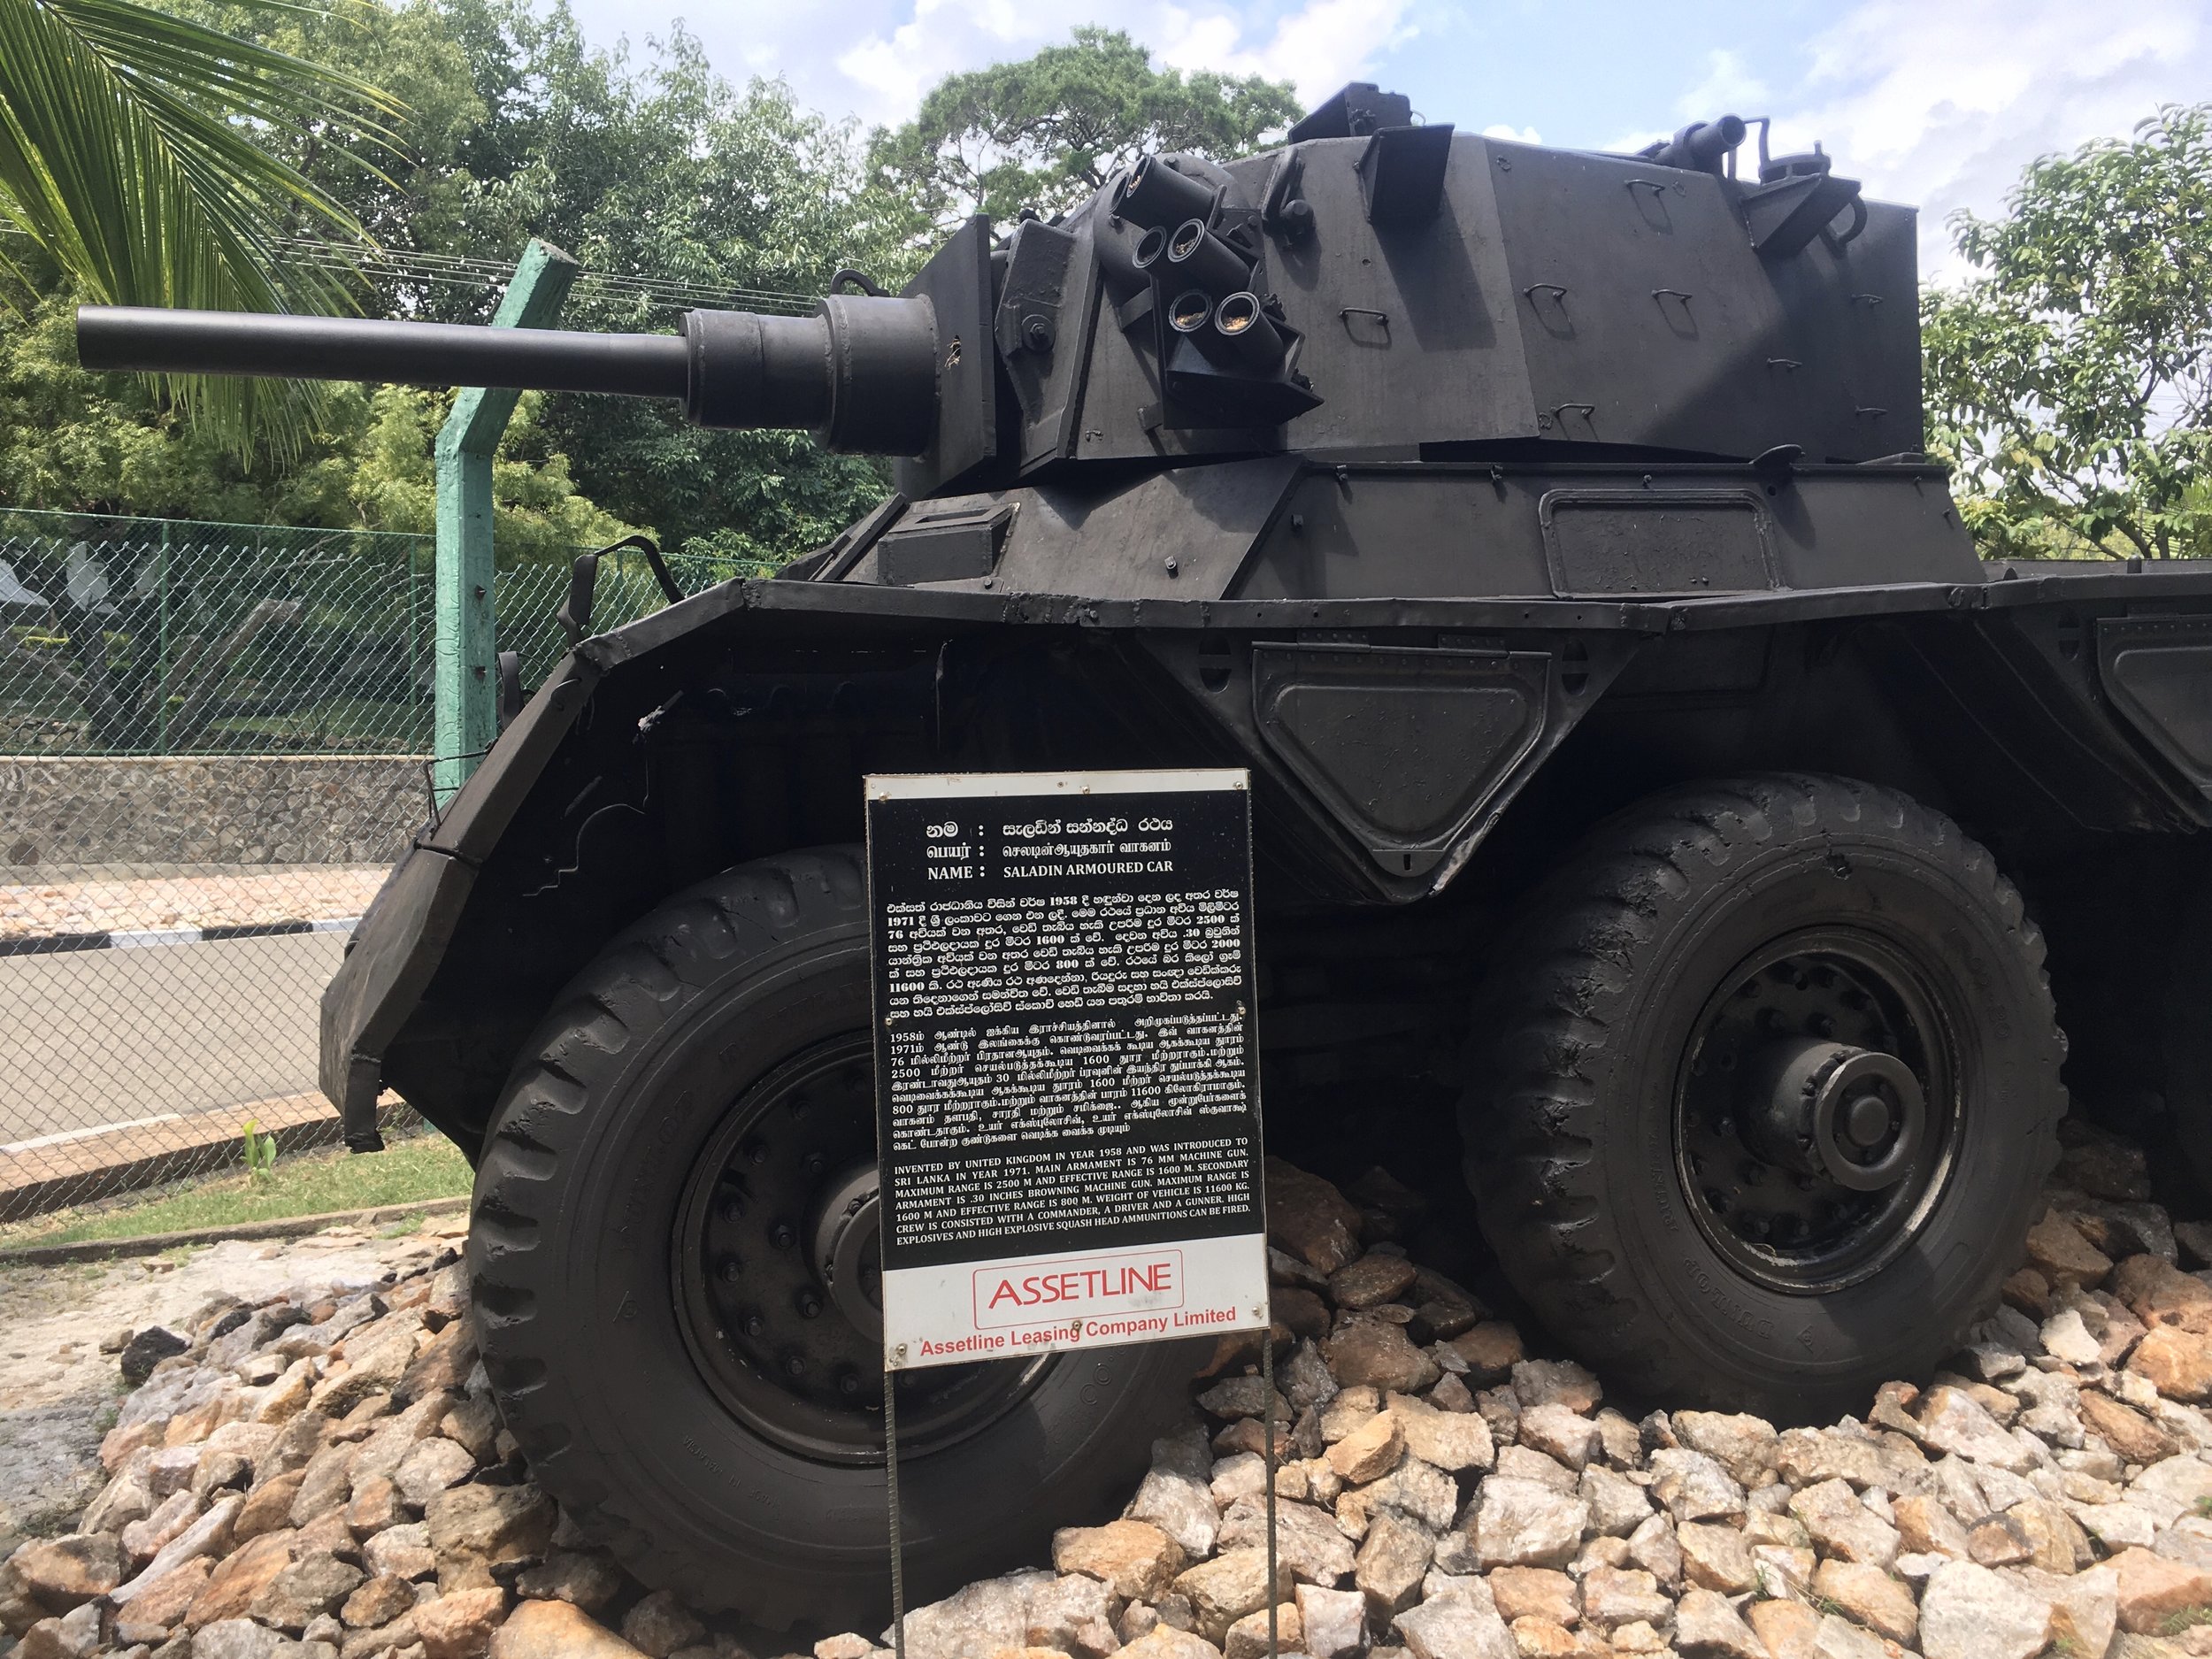 Orrs Hill Army Museum